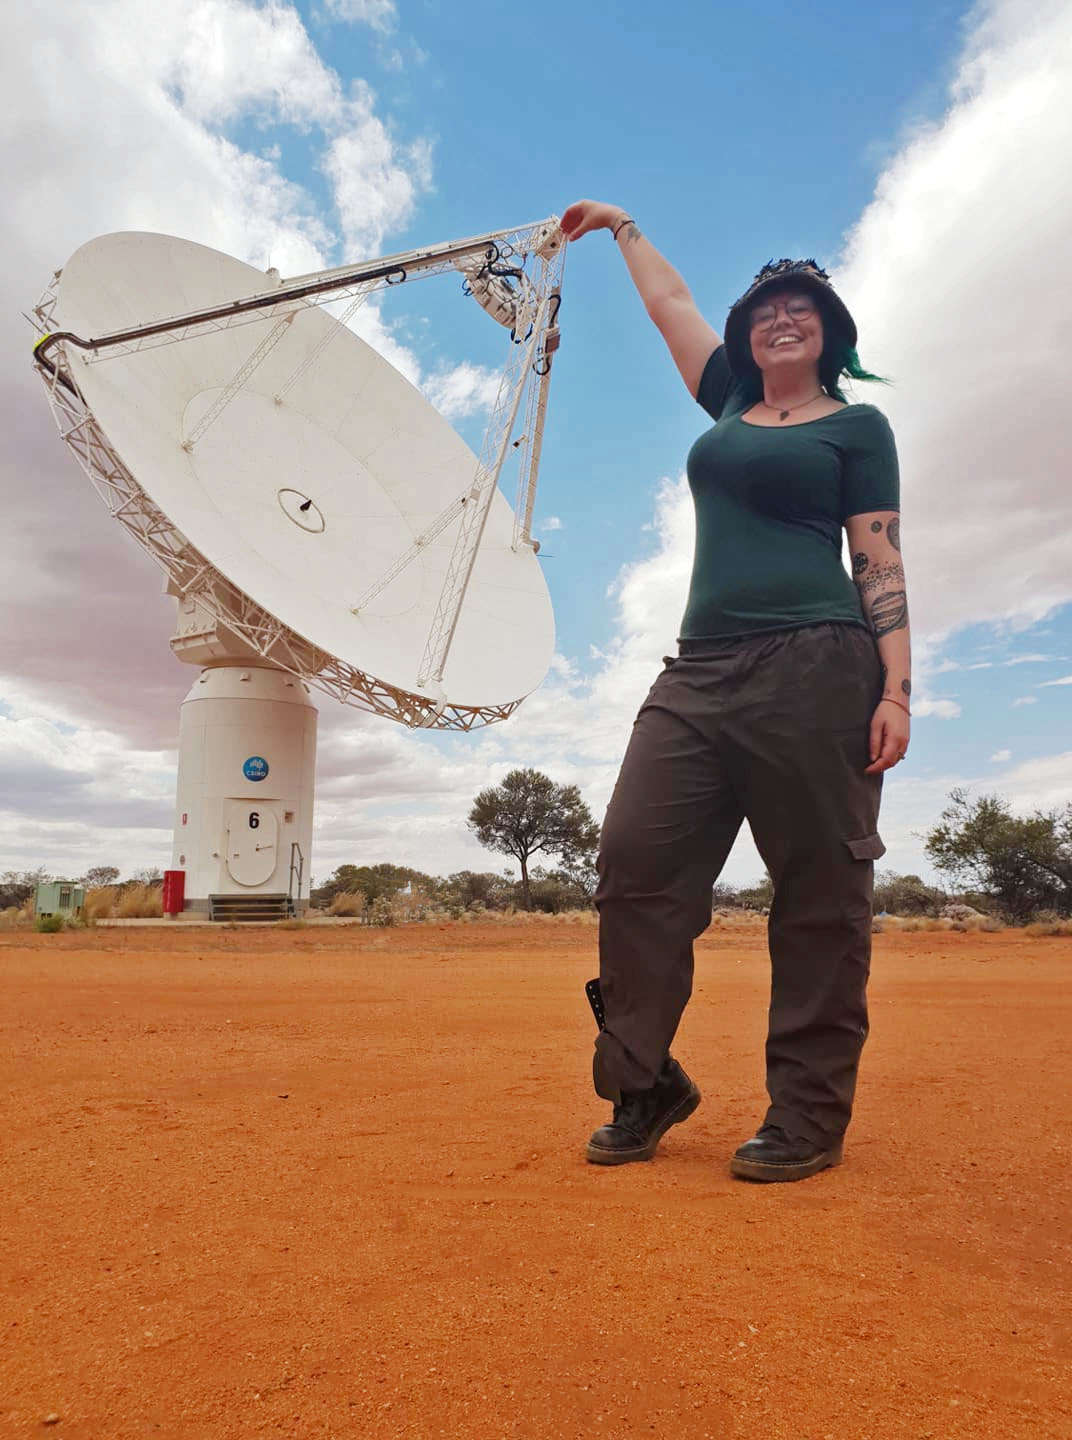 A woman stands infront of a large radio telescope in a desert landscape